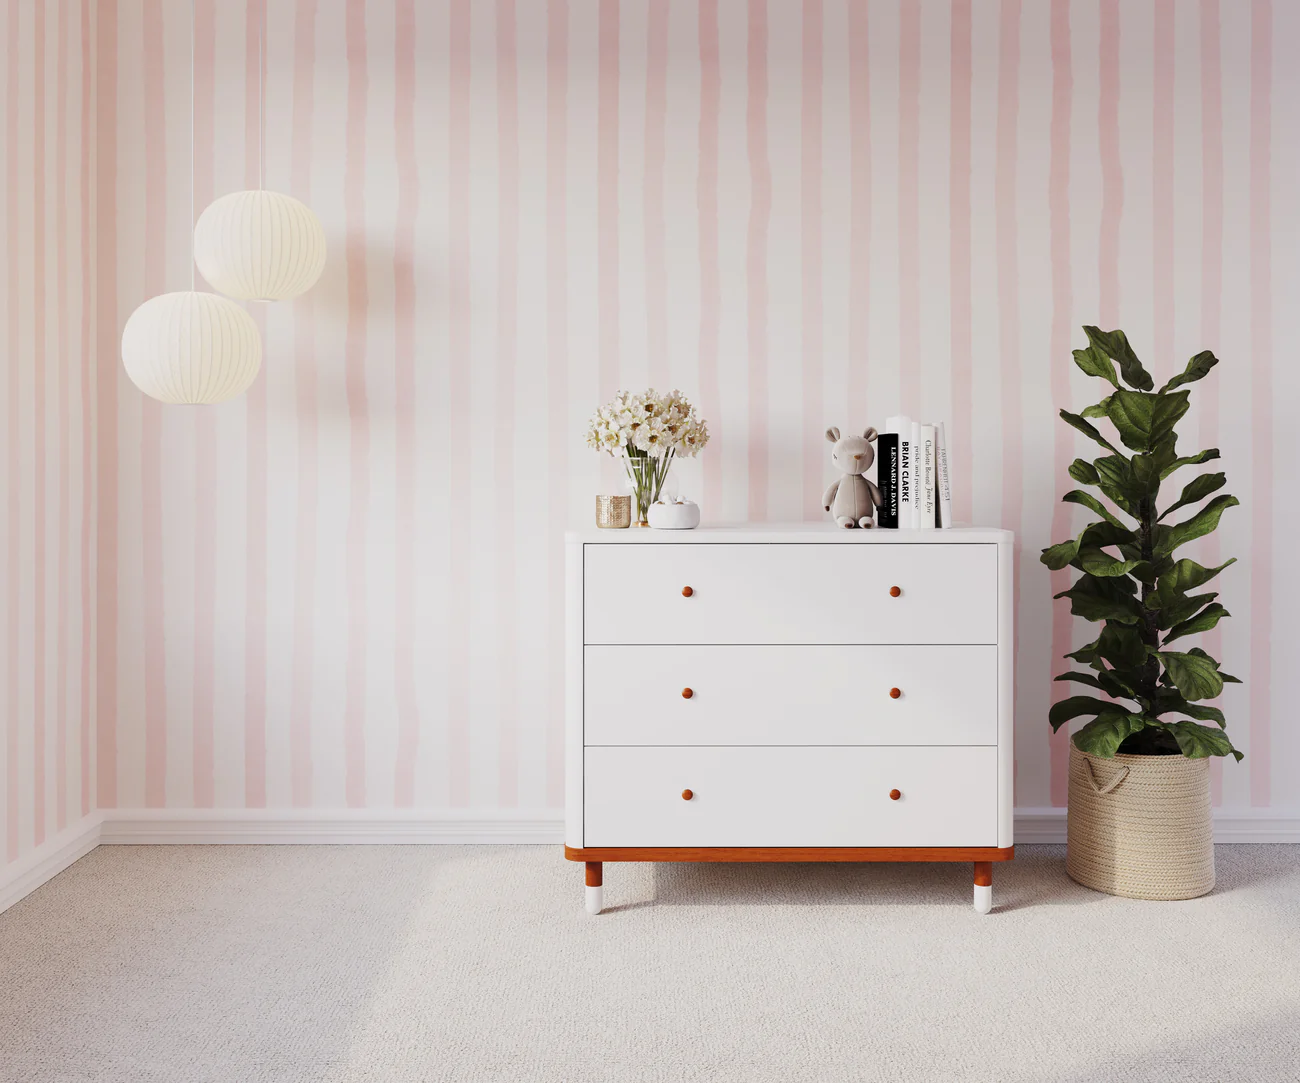 15 Pink Nursery Ideas For Every Design Style